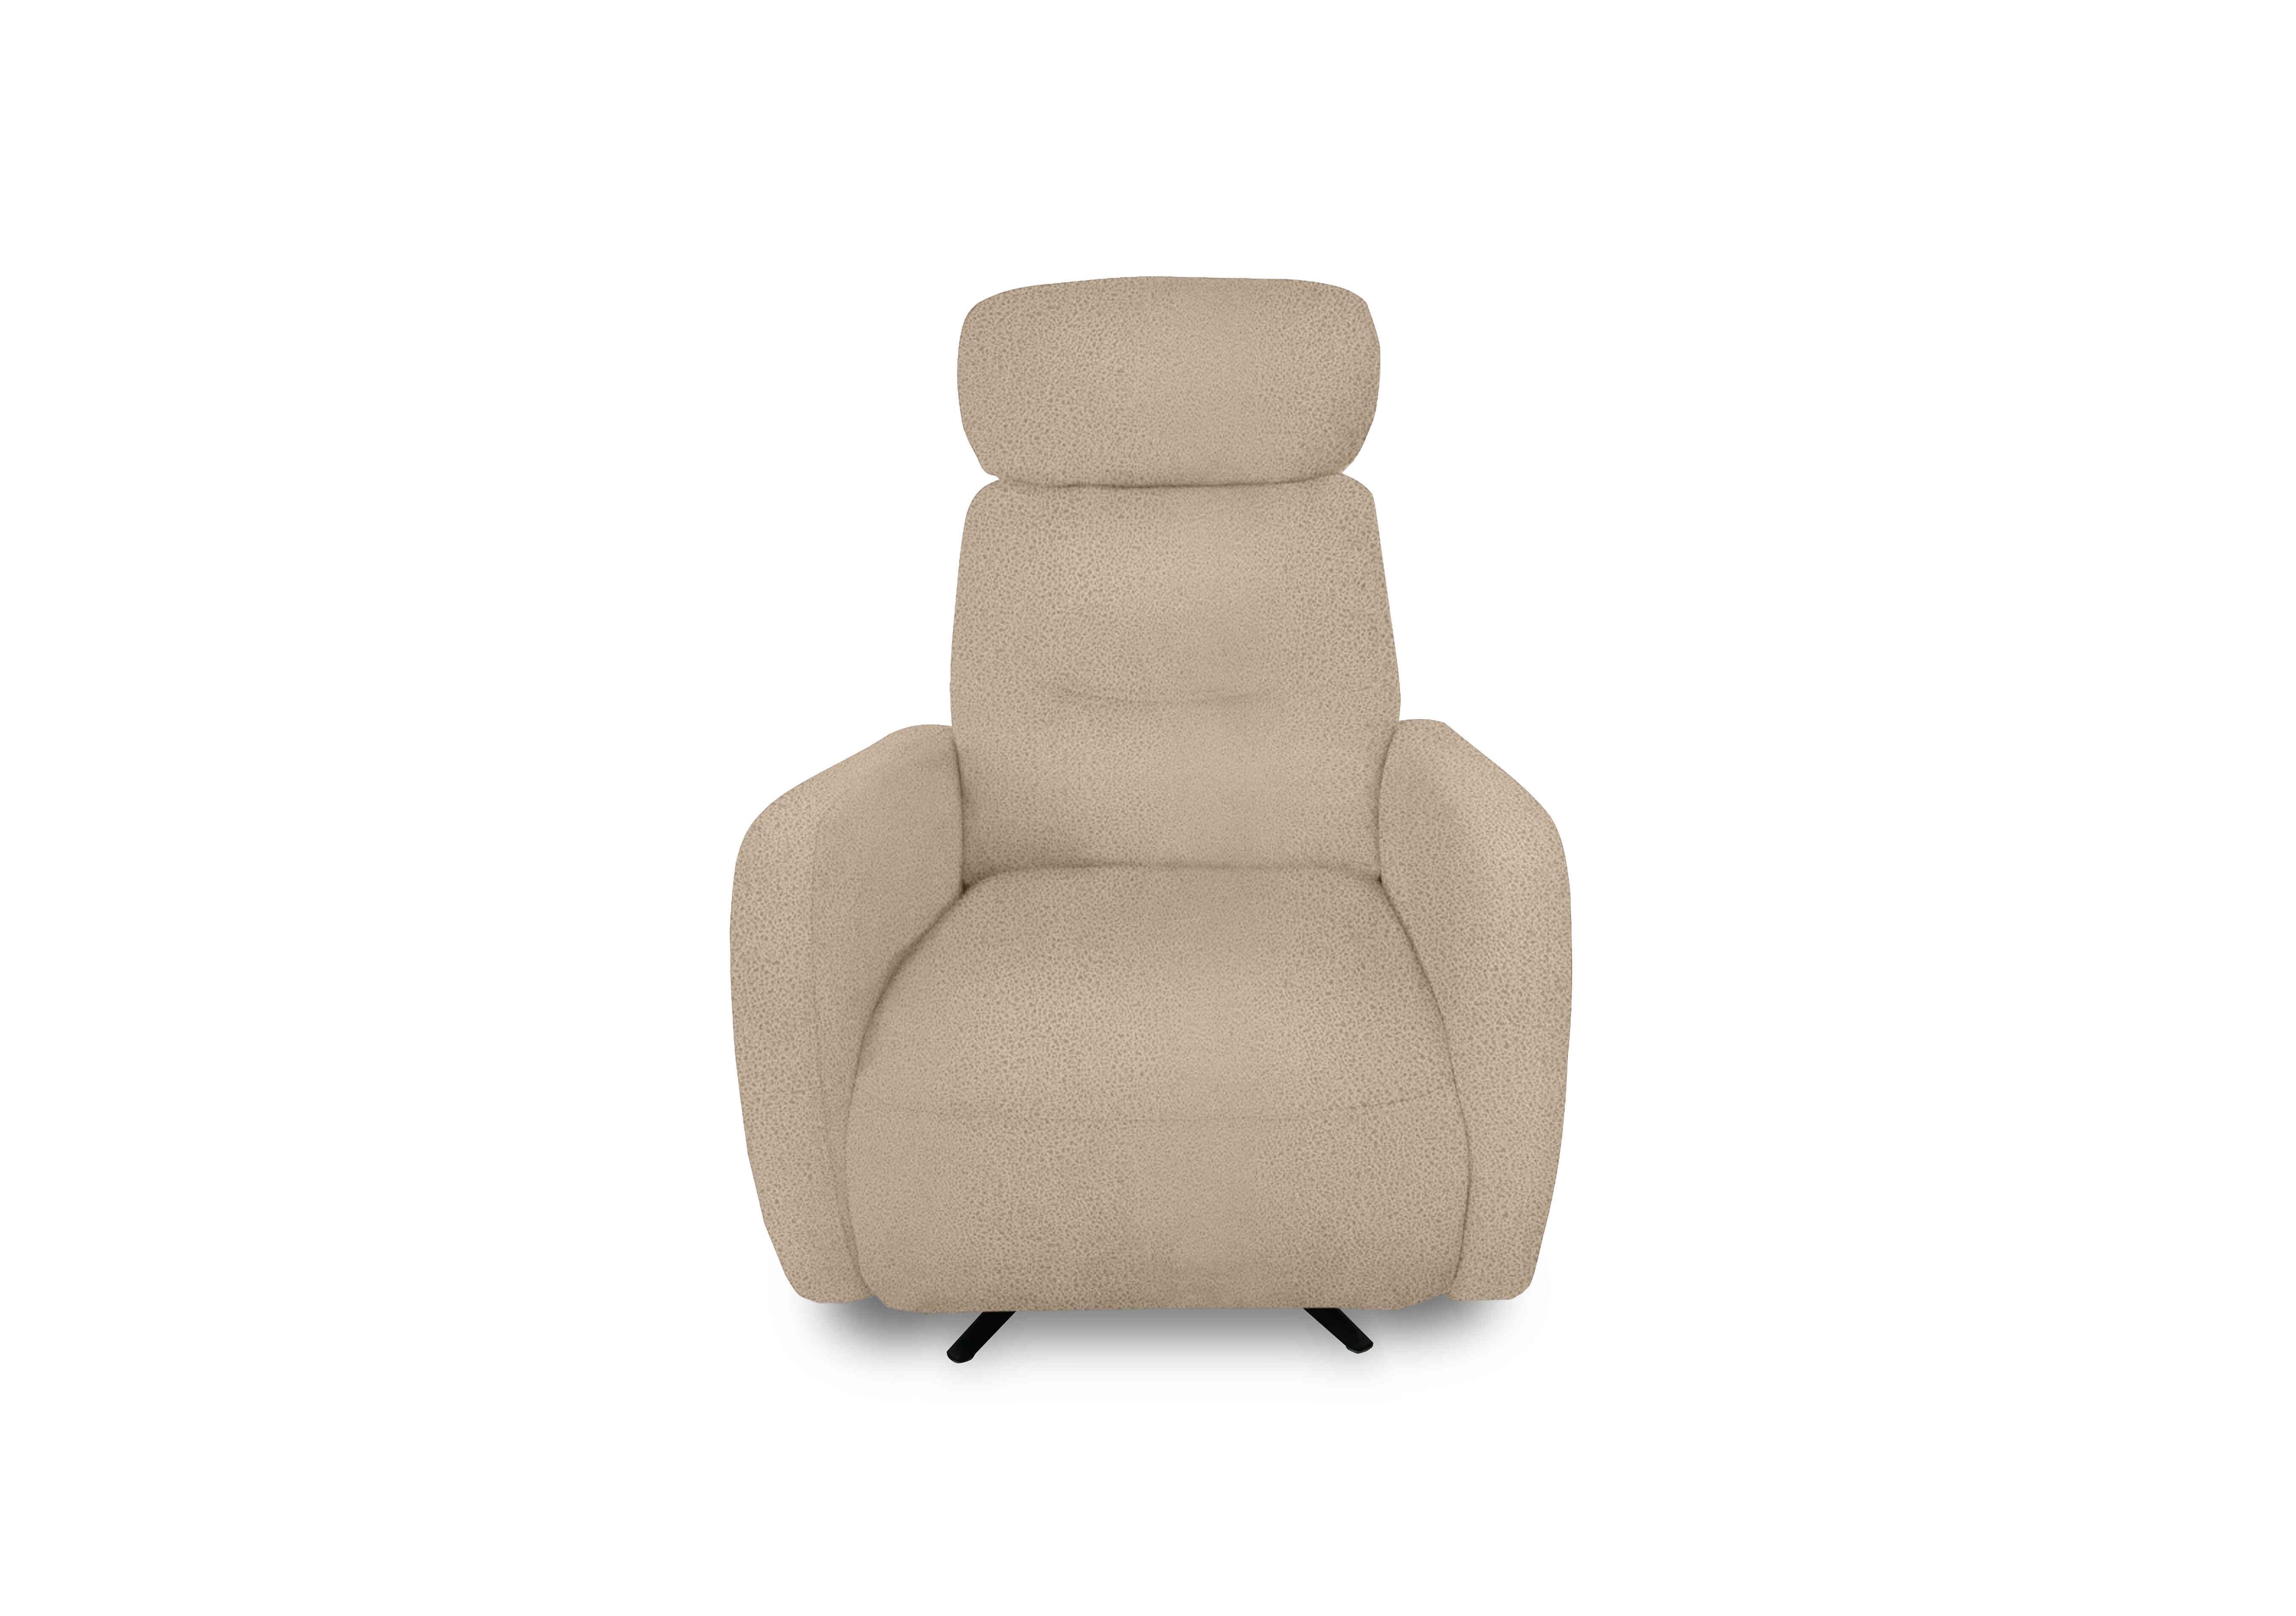 Designer Chair Collection Tokyo Fabric Manual Recliner Swivel Chair in Bfa-Blj-R20 Bisque on Furniture Village